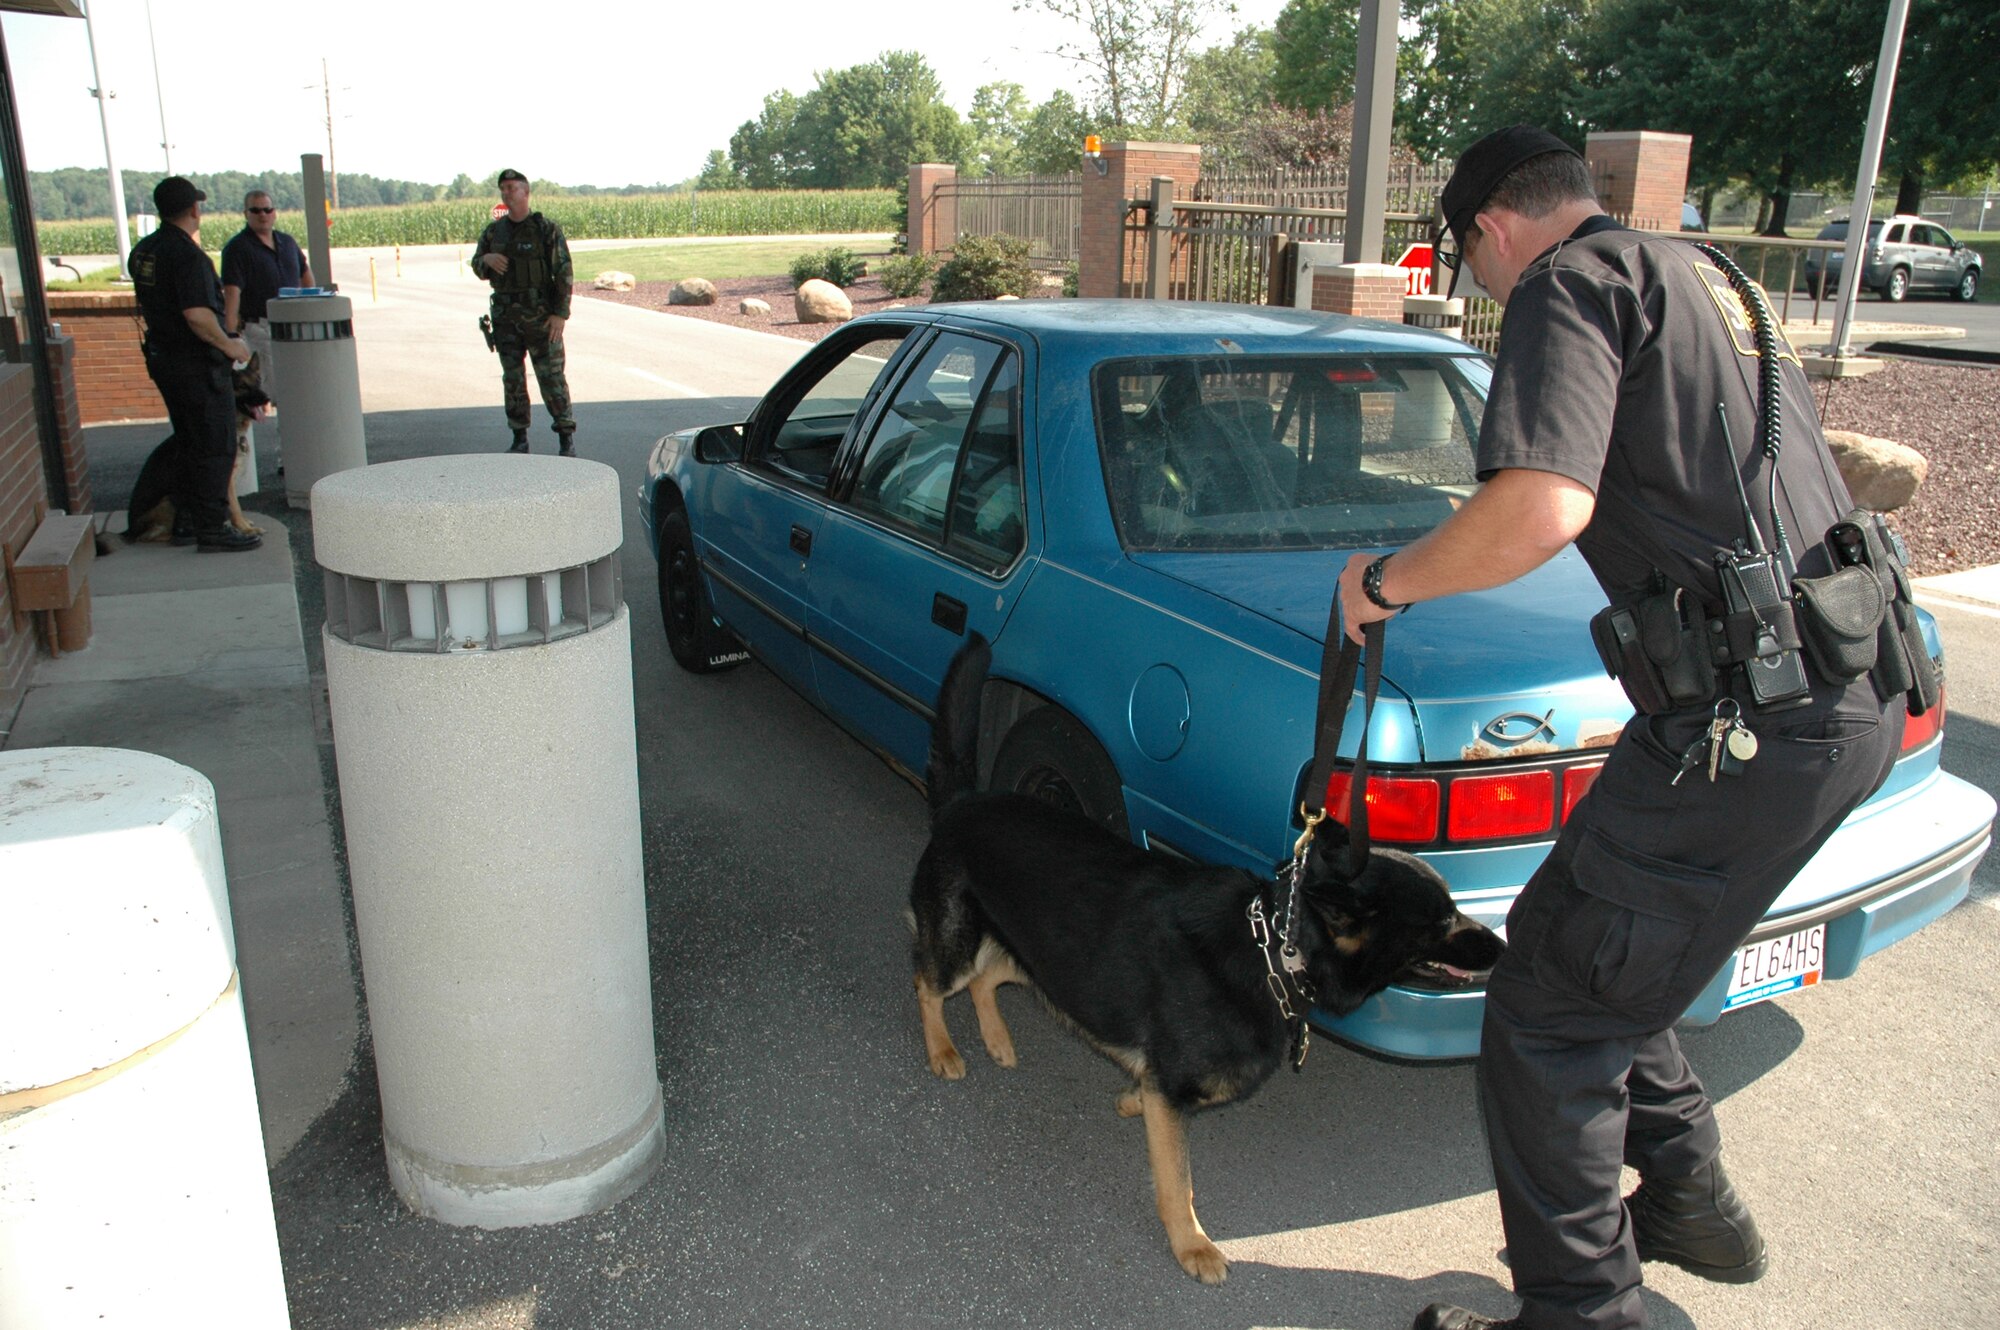 YOUNGSTOWN AIR RESERVE STATION, Ohio — Todd Reichenbach, a K-9 handler with Summit County Sheriff's office, takes his canine "Ammo" around vehicles leaving here to detect explosives or narcotics.  Last month, eight K-9s  were on duty here to perform explosive and narcotics detection.  The intent of the operation was to be proactive and remind personnel as well as the surrounding community that the installation operates under a no tolerance policy.  In addition, the intent was to deter any individual or group that could intend on trying to bring harm to the installation or its personnel.  Air Force OSI  Special Agent Julie McKee organized the joint canine effort with local law enforcement officials and Youngstown Air Reserve Station officials.  Participating agencies include:  Trumbull Co. Sheriff, Summit Co. Sheriff, Warren Police Dept., Ohio State Highway Patrol, and the Air Force Office of Special Investigations based out of Pittsburgh ARS. U.S. Air Force Photo/Capt. Brent J. Davis        